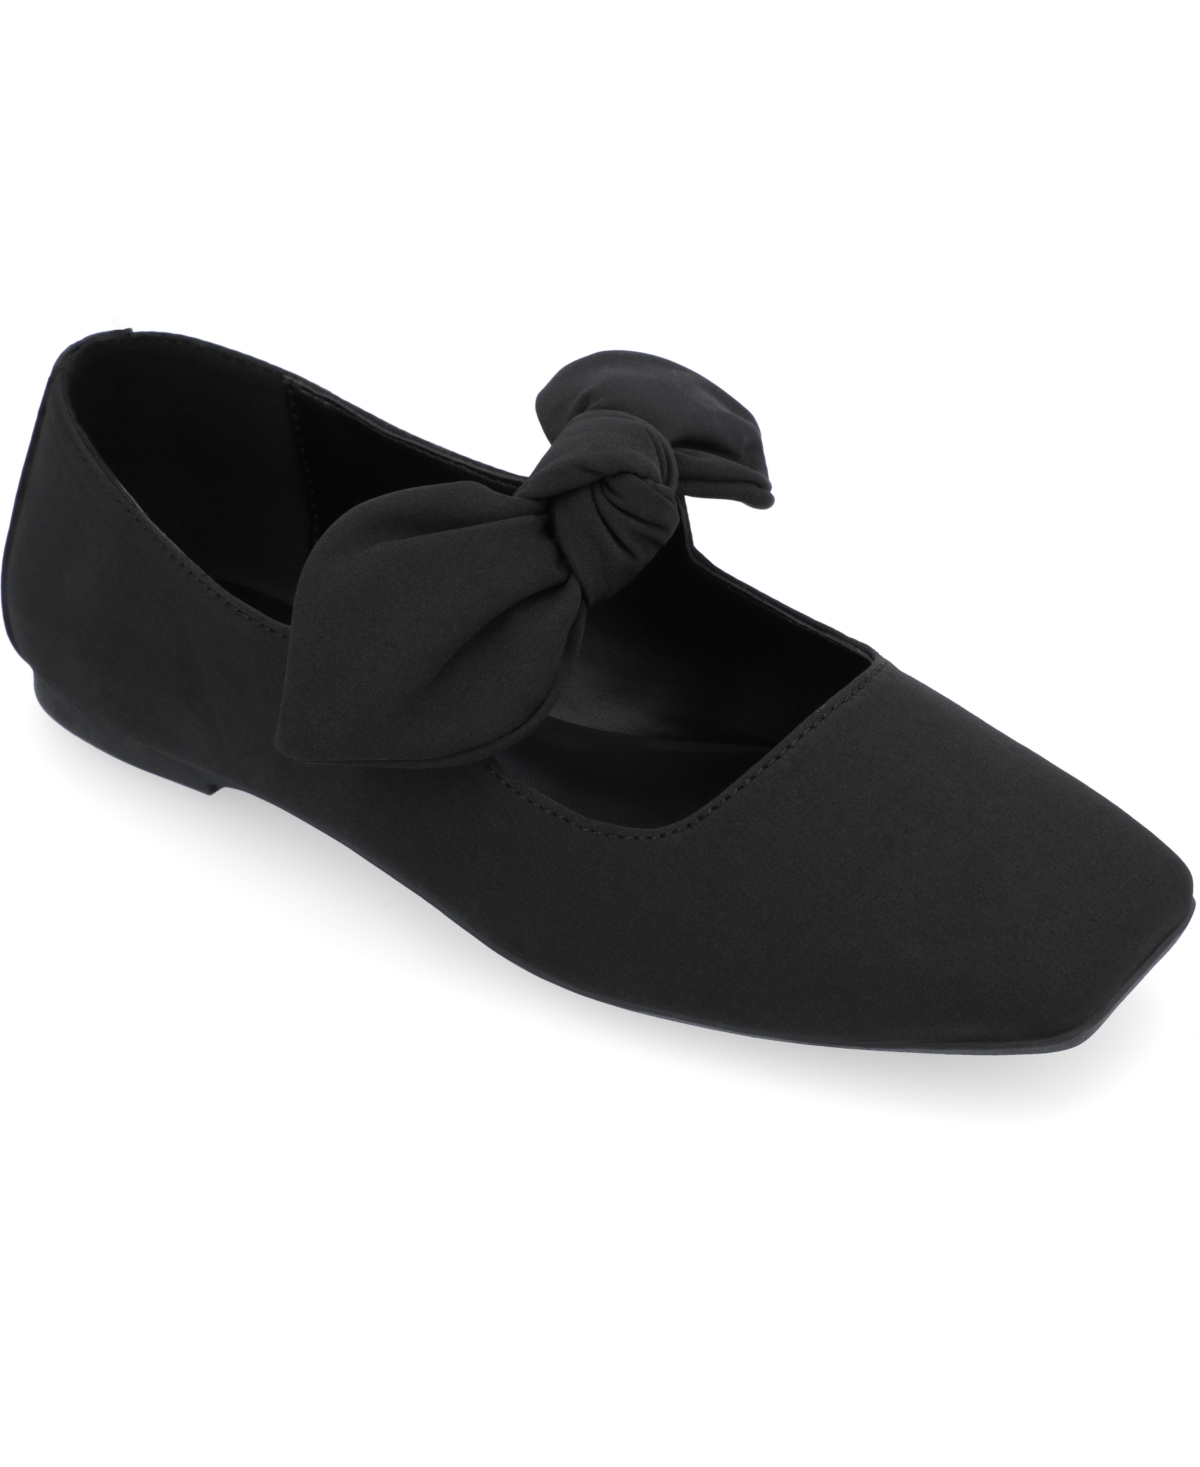 Victorian Boots & Shoes – Granny Boots & Shoes Journee Collection Womens Seralinn Bow Flats - Black $56.24 AT vintagedancer.com